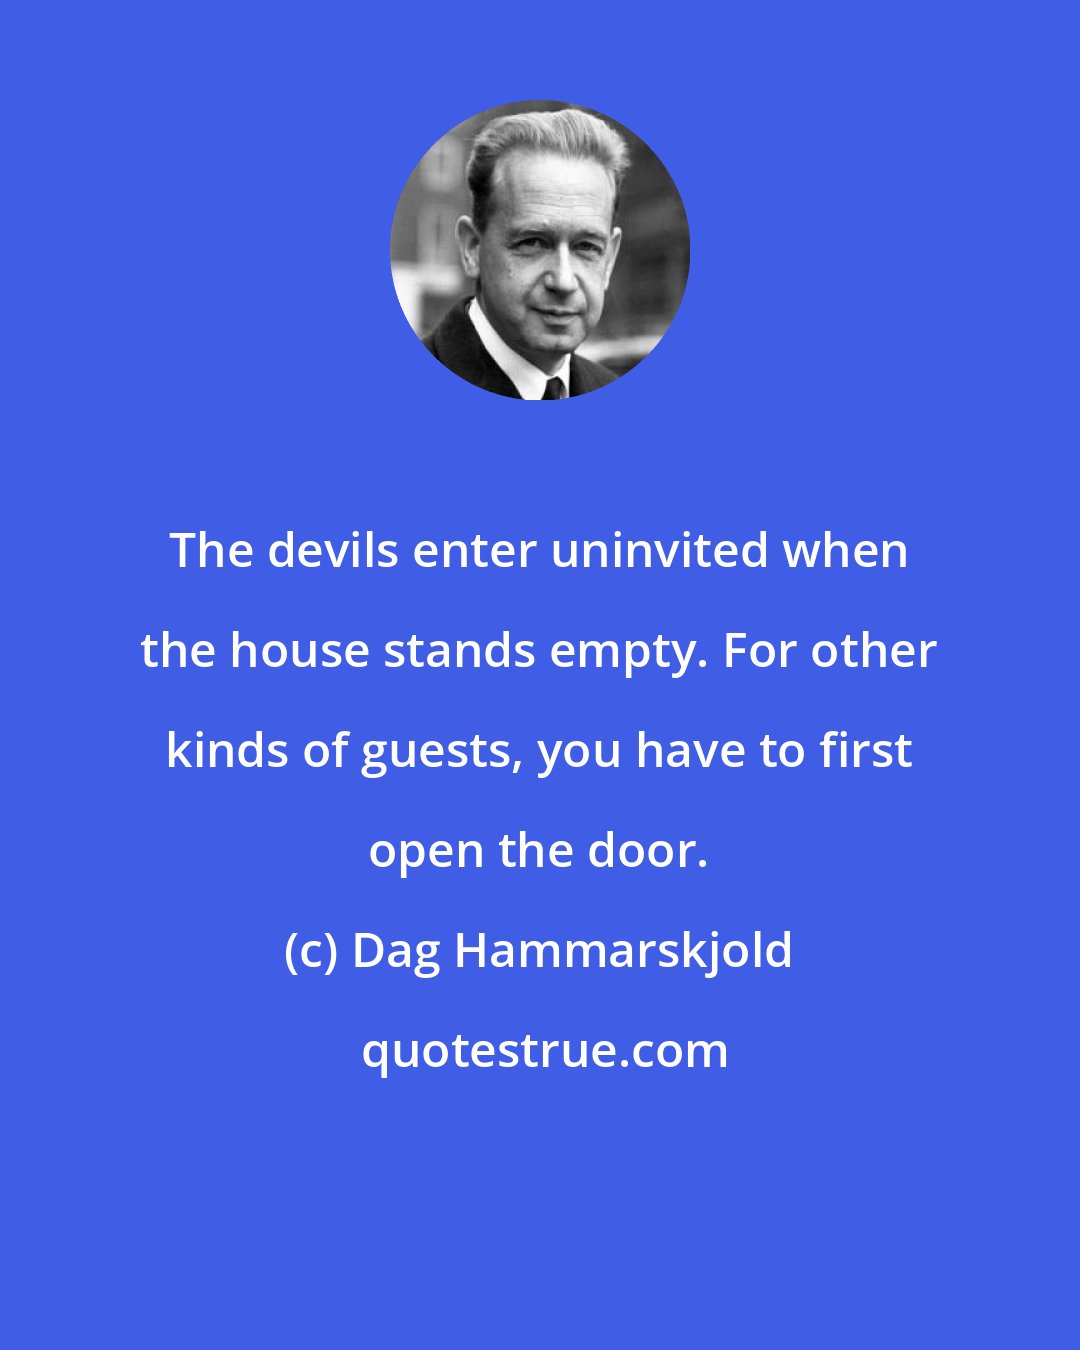 Dag Hammarskjold: The devils enter uninvited when the house stands empty. For other kinds of guests, you have to first open the door.